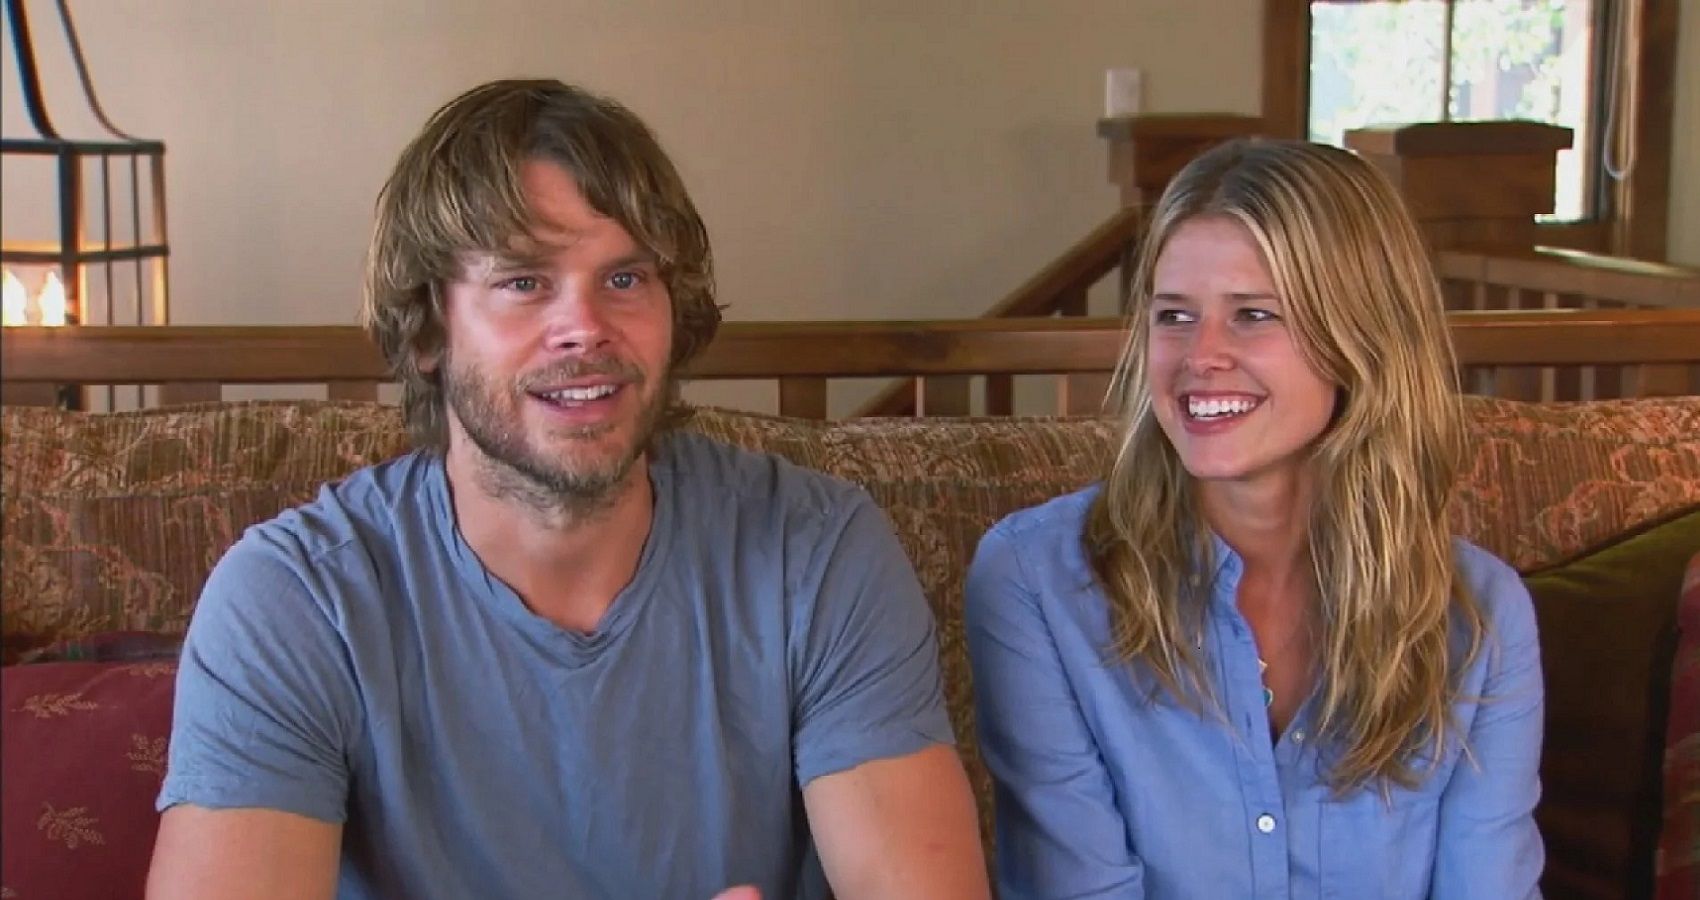 NCIS: Los Angeles' Eric Christian Olsen with his wife Parks and Recreation actor Sarah Wright